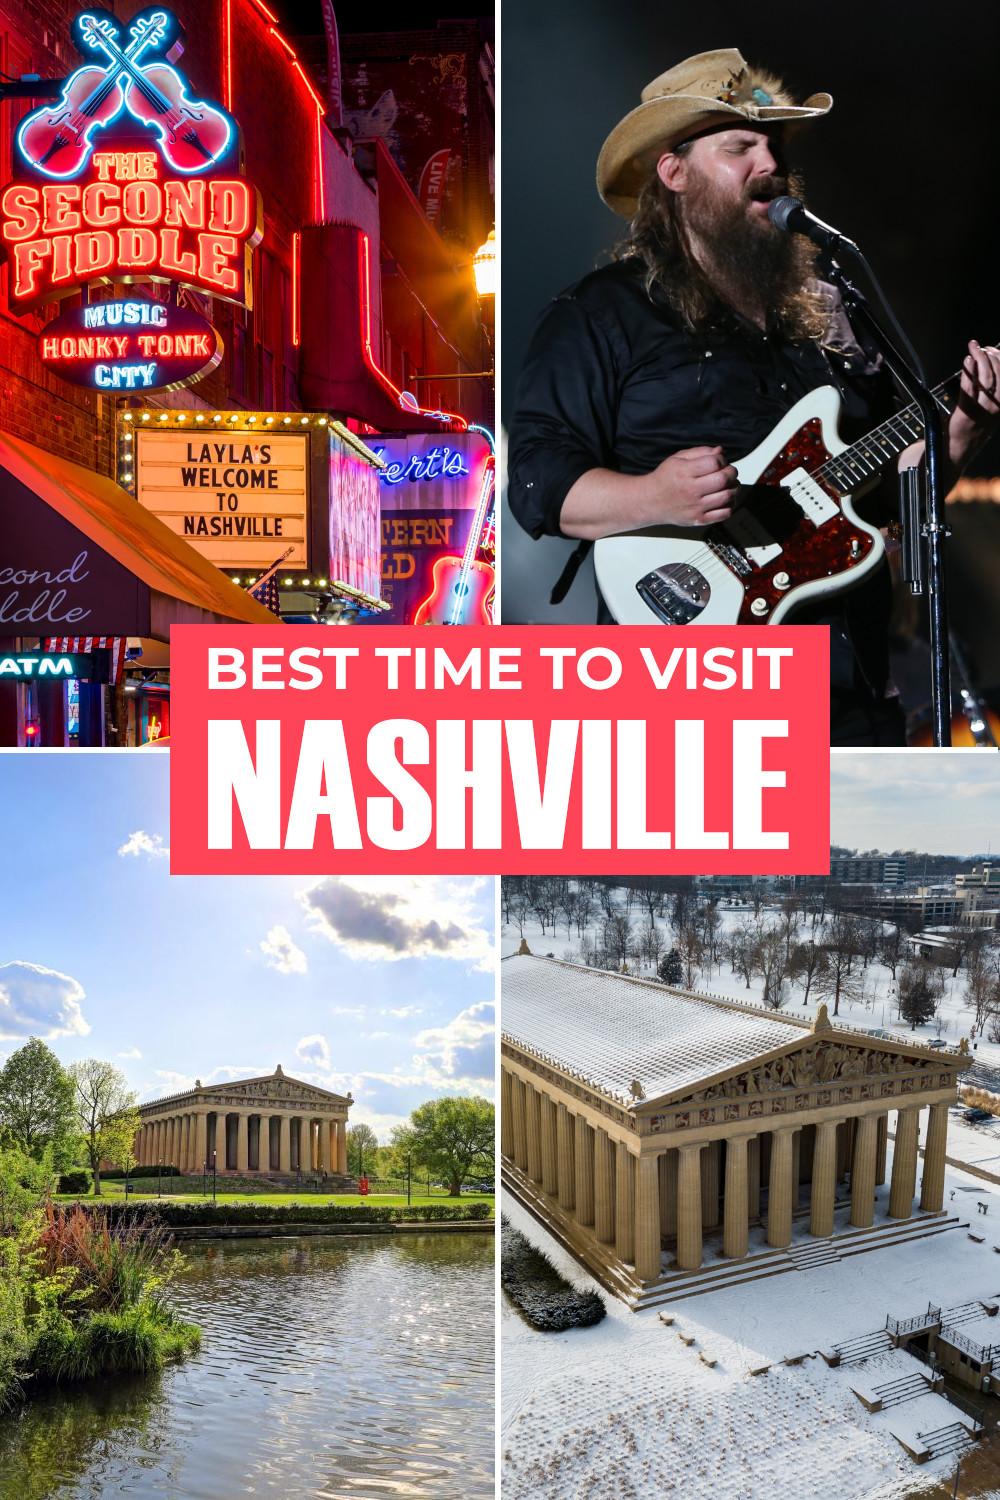 Best time to visit Nashville - when to go for the weather, listening to live music, saving money or avoiding the crowds.